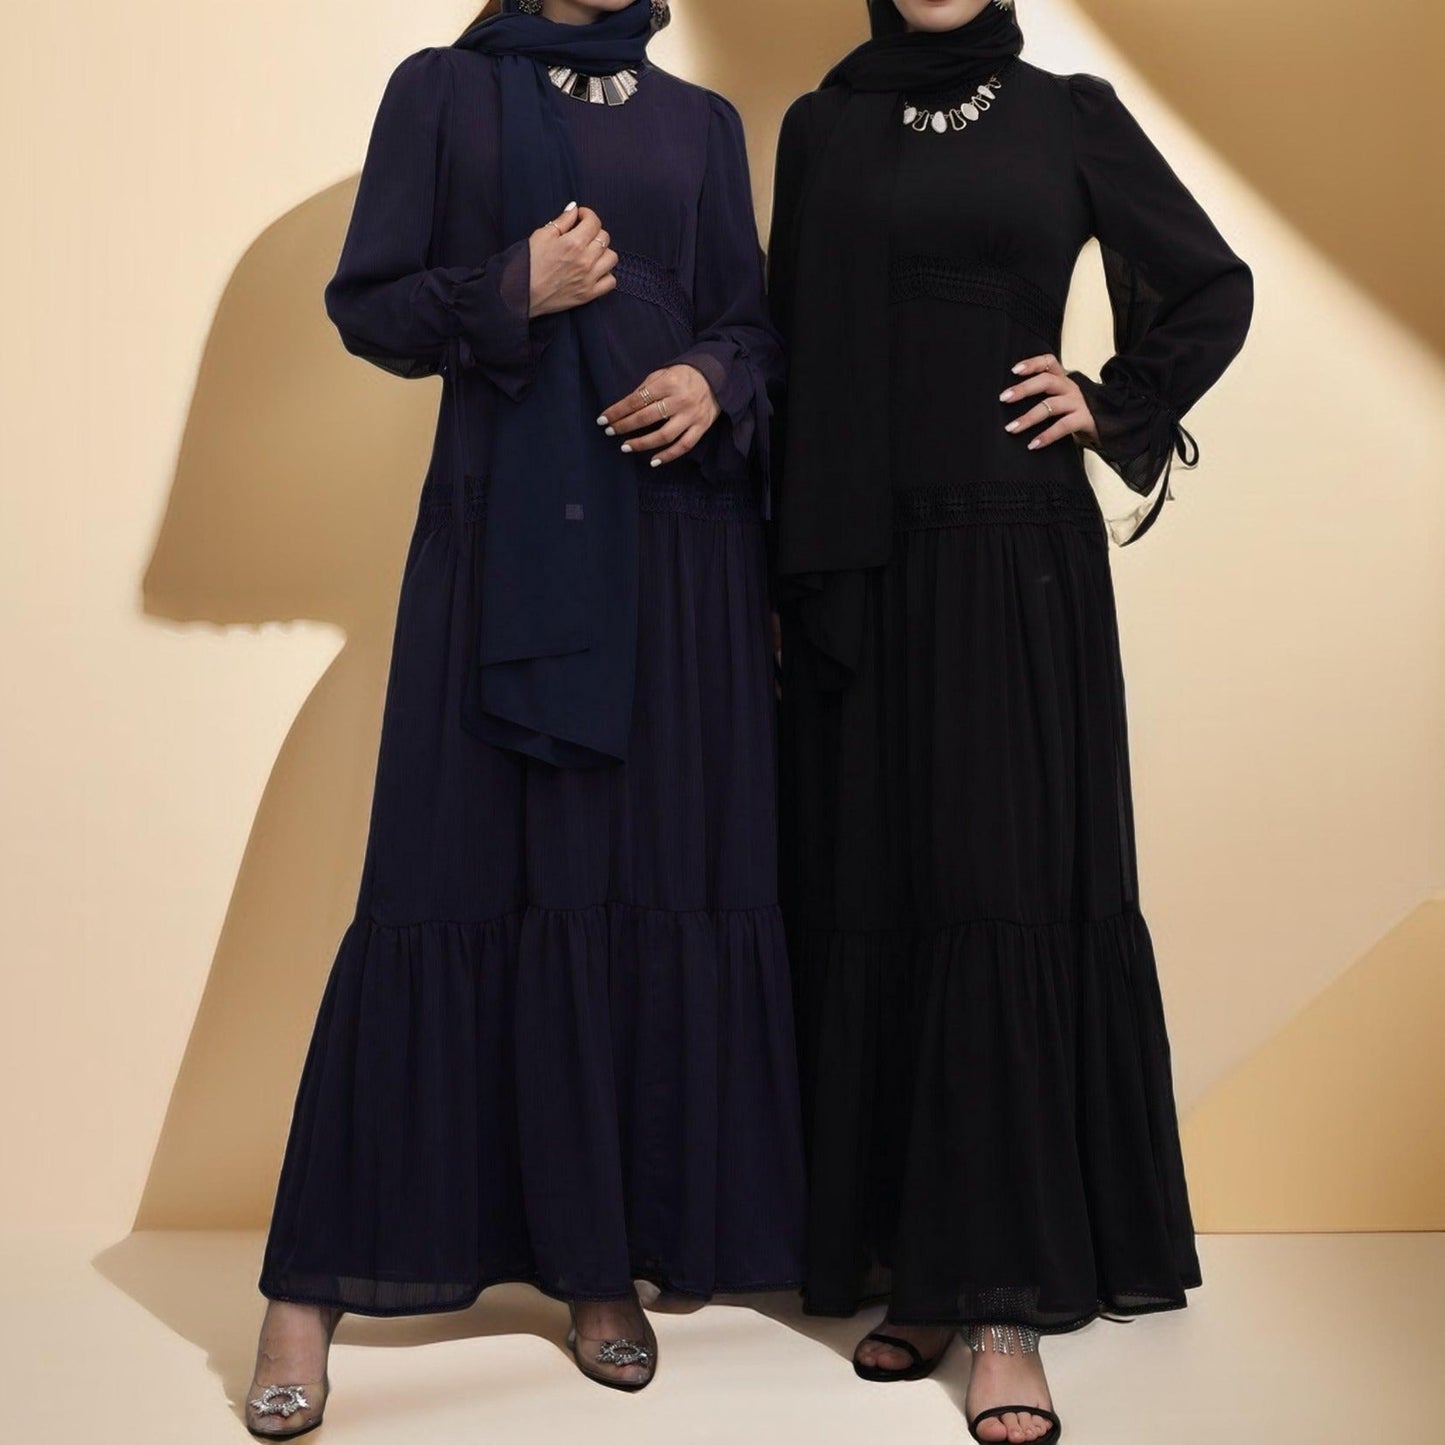 French style maxi dress - Try Modest Limited 